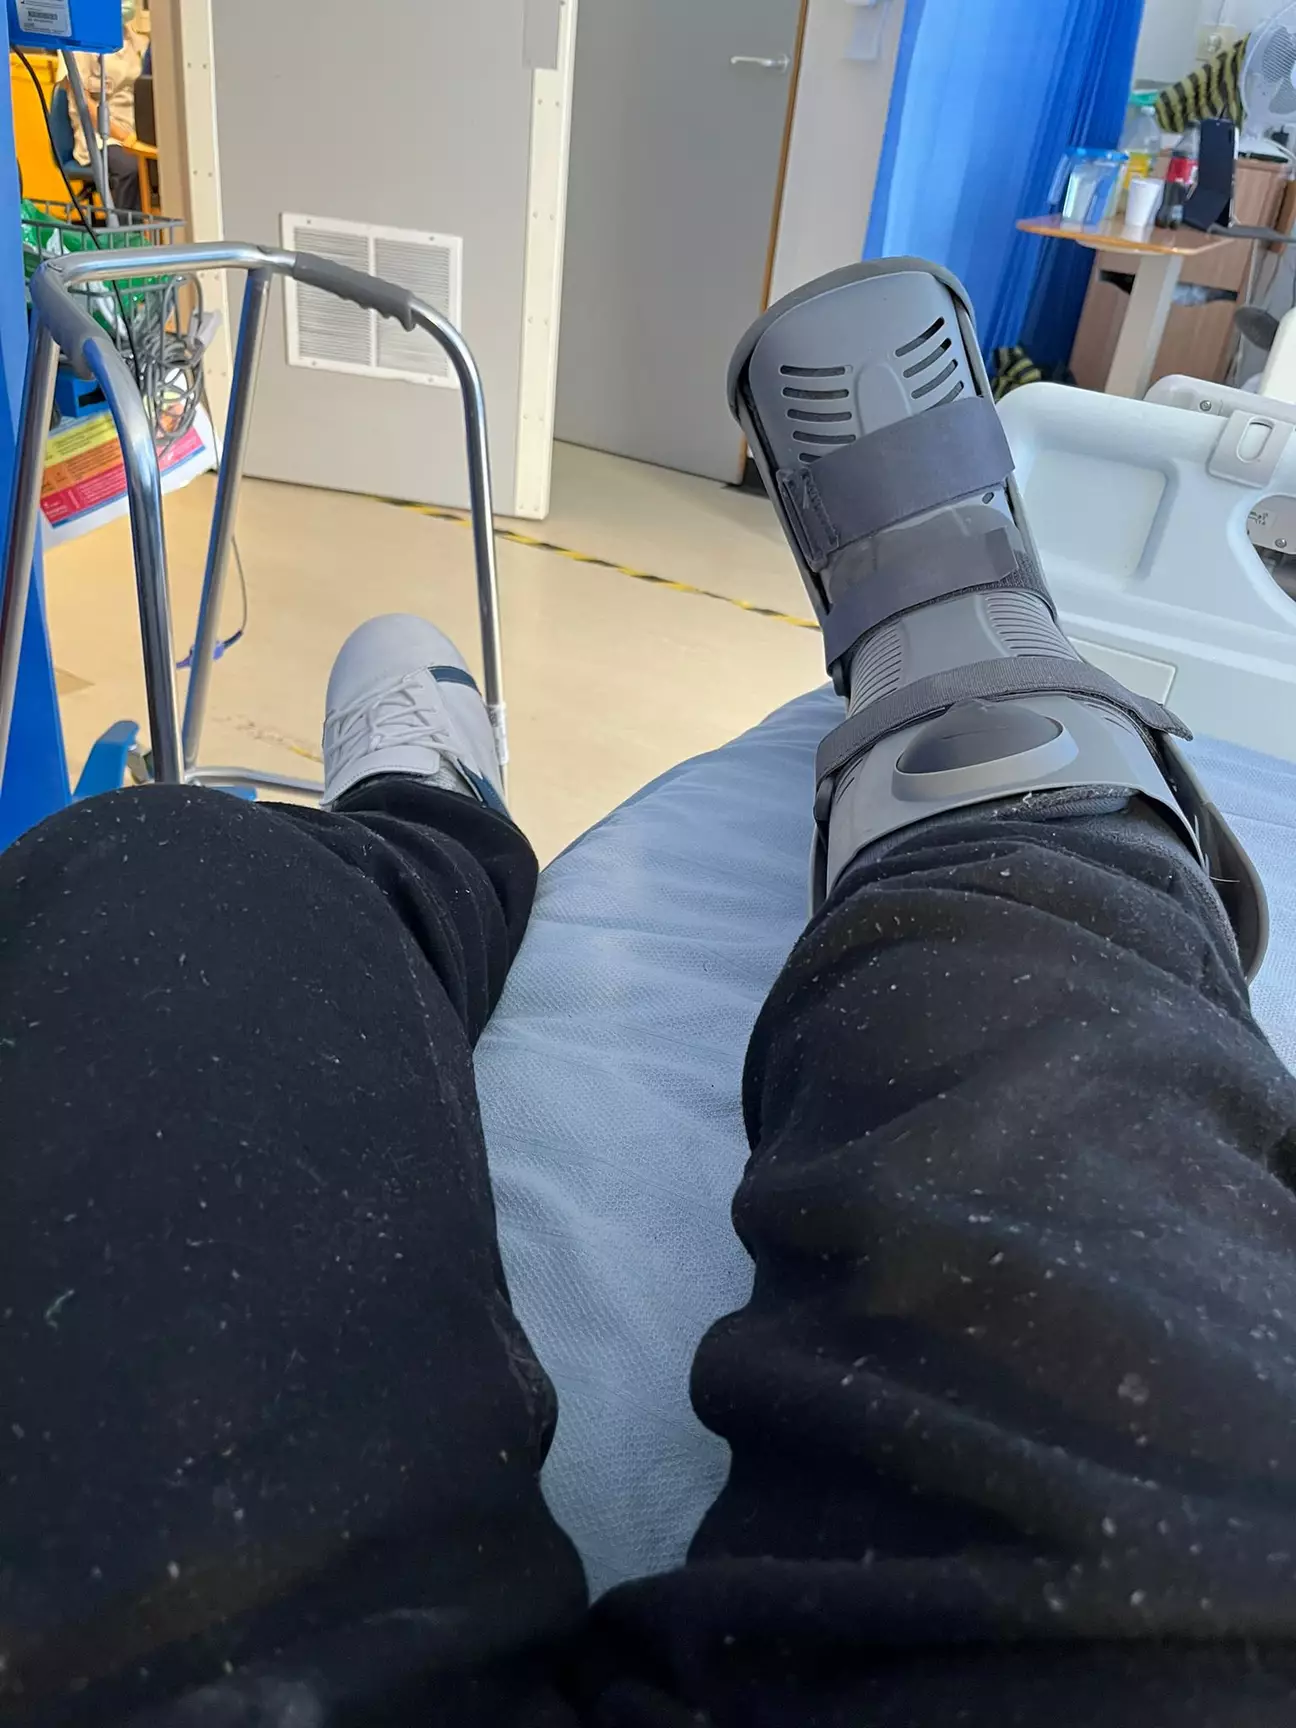 While he was in hospital, doctors found two blocked arteries in addition to his fractured toe, potentially saving his leg from amputation.